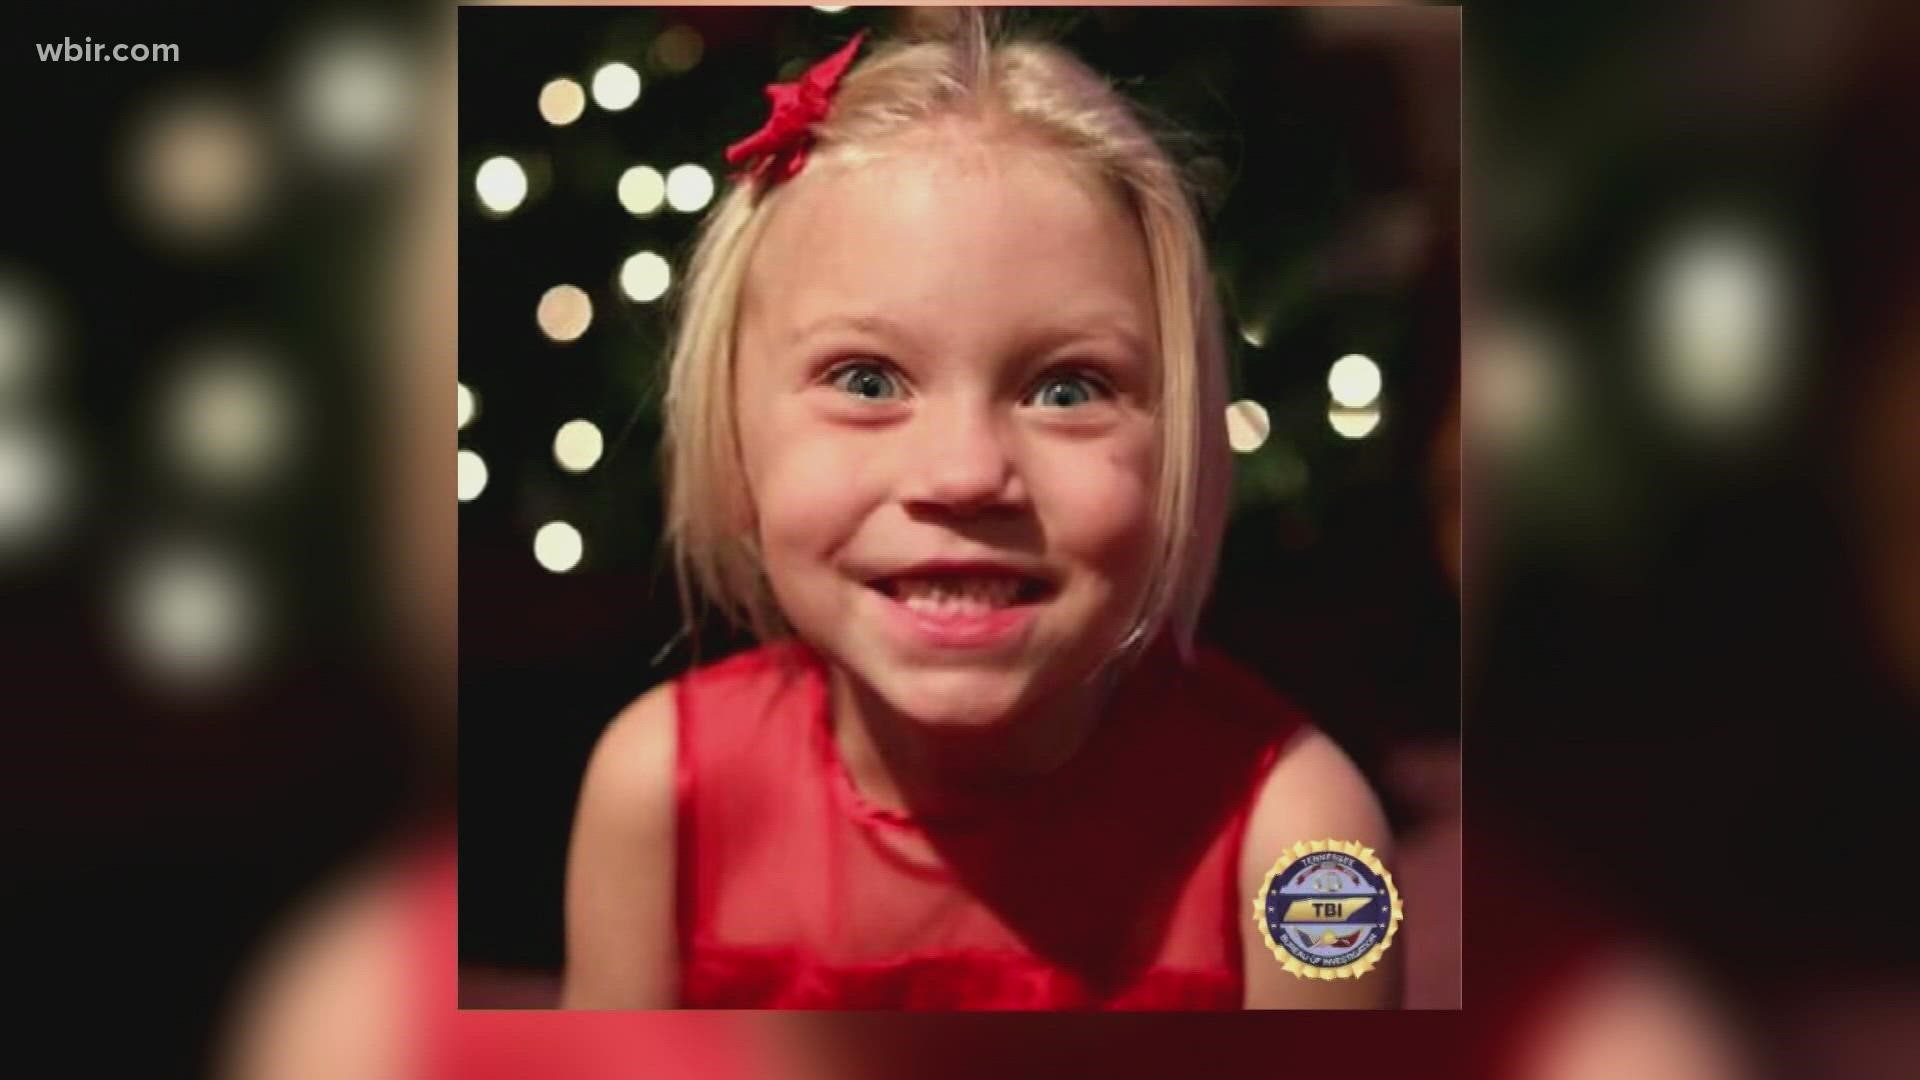 Don Wells, the father of missing 5-year-old Summer Wells, made an appearance on Dr. Phil to speak about his daughter's case. She has been missing for nearly 5 months